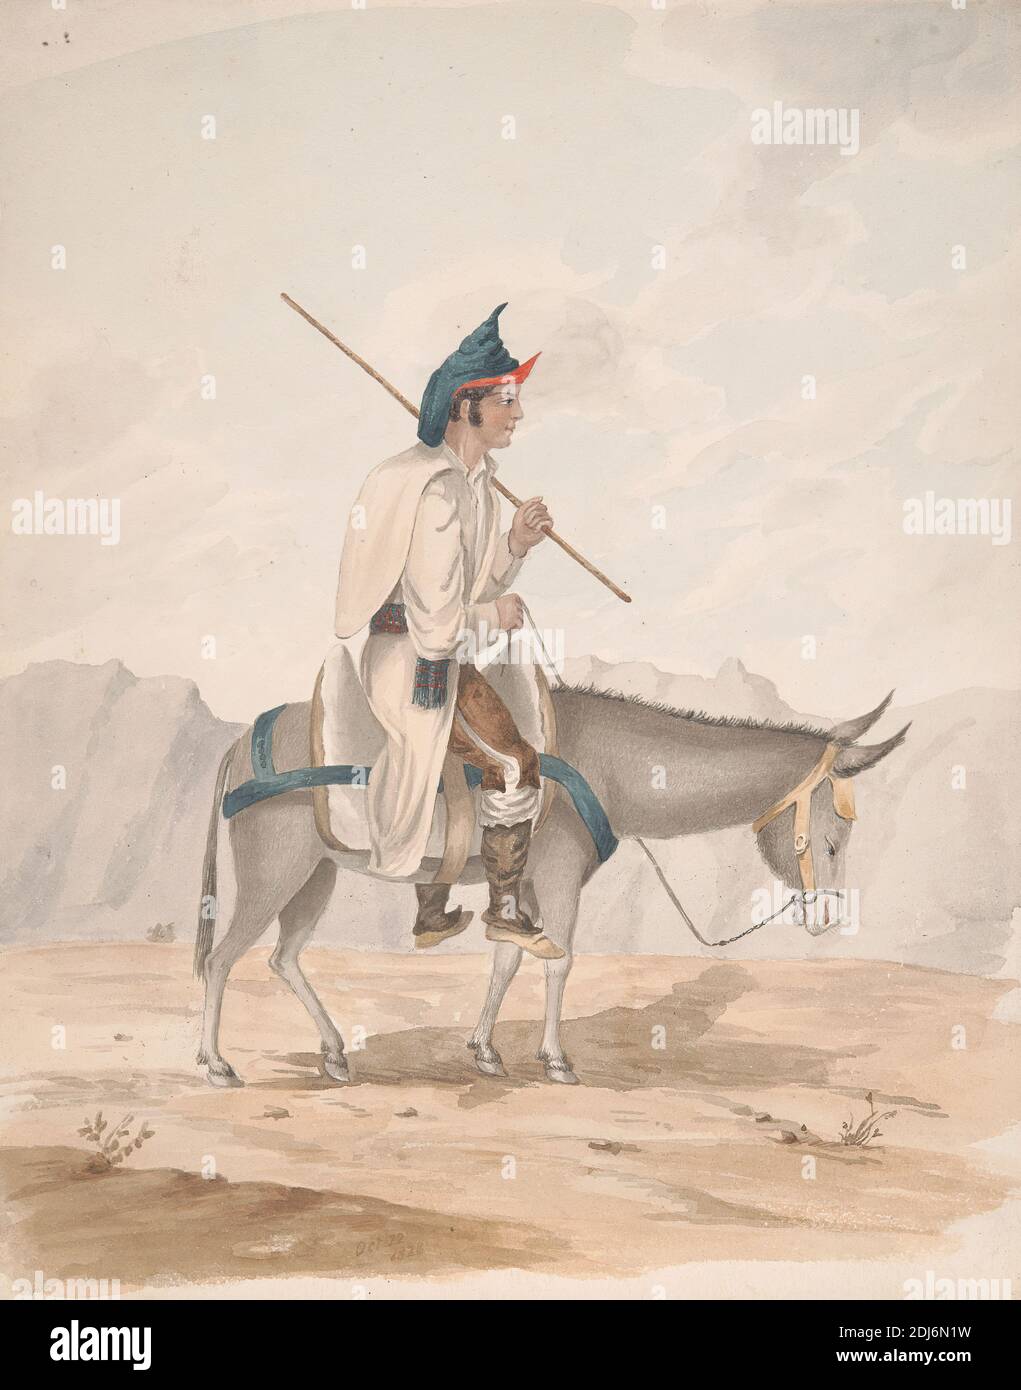 Grand Canary-Man on a Donkey, Alfred Diston, active 1818–1829, 1828, Watercolor and pen and black ink on medium, slightly textured, cream wove paper, Sheet: 9 1/8 × 7 1/4 inches (23.2 × 18.4 cm), costume, costume, donkey, figure study, genre subject, man, Europe, Spain, Tenerife Stock Photo